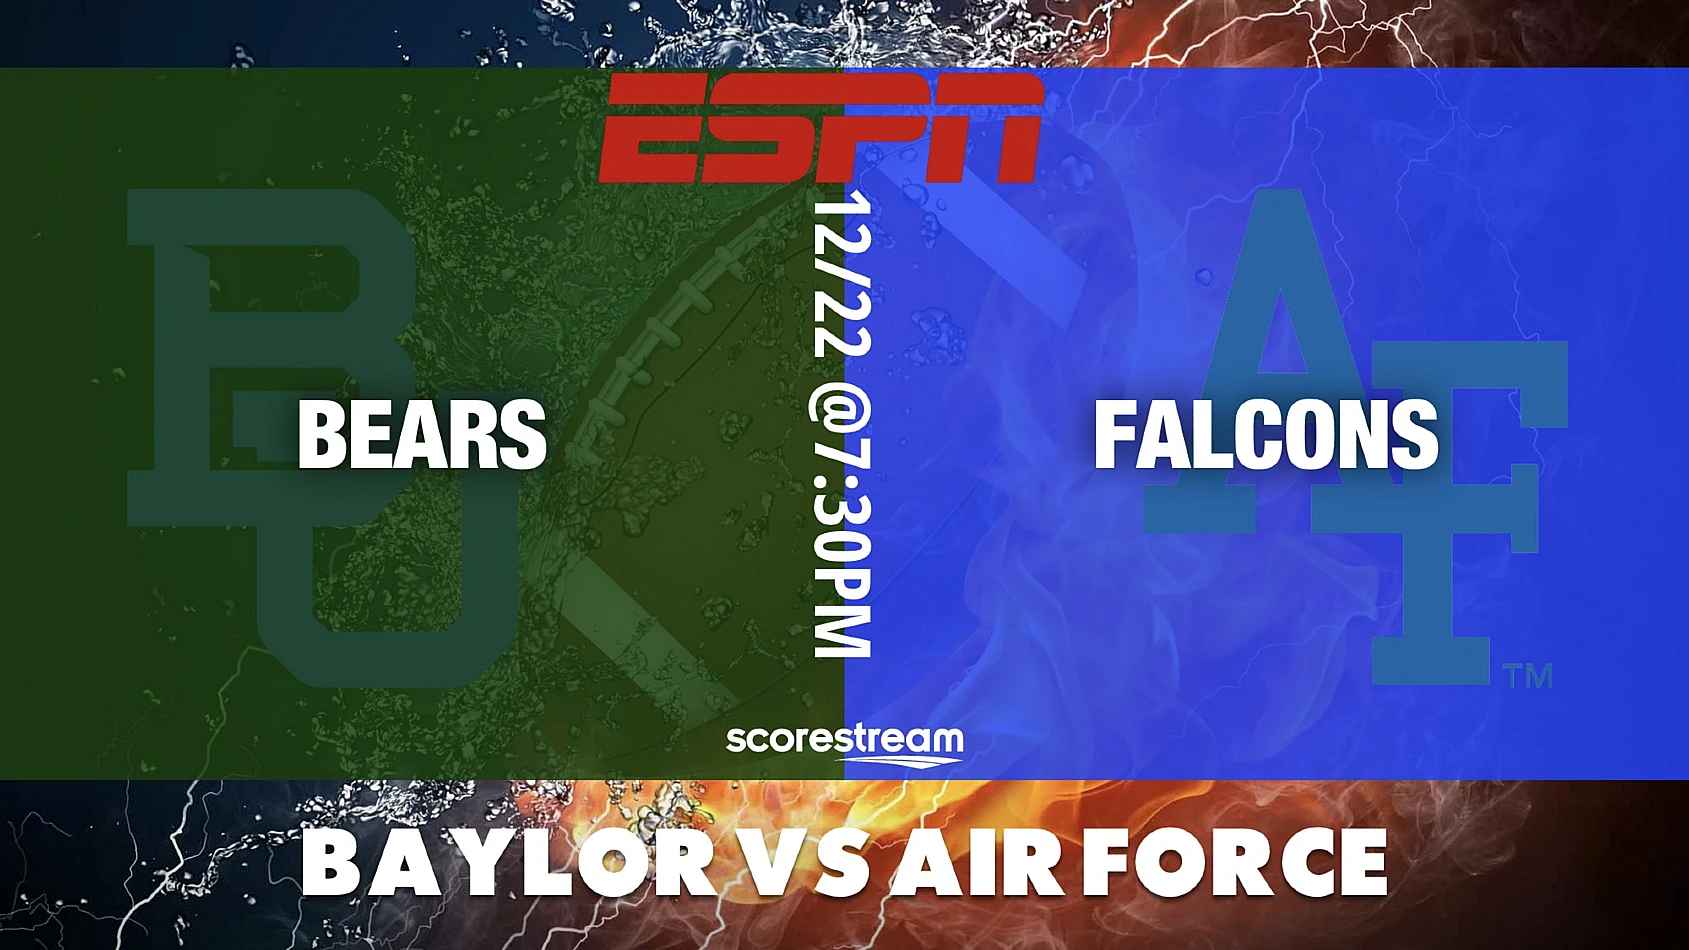 Watch the Baylor Bears vs the Air Force Falcons live Lockheed Martin Armed Forces Bowl 2022